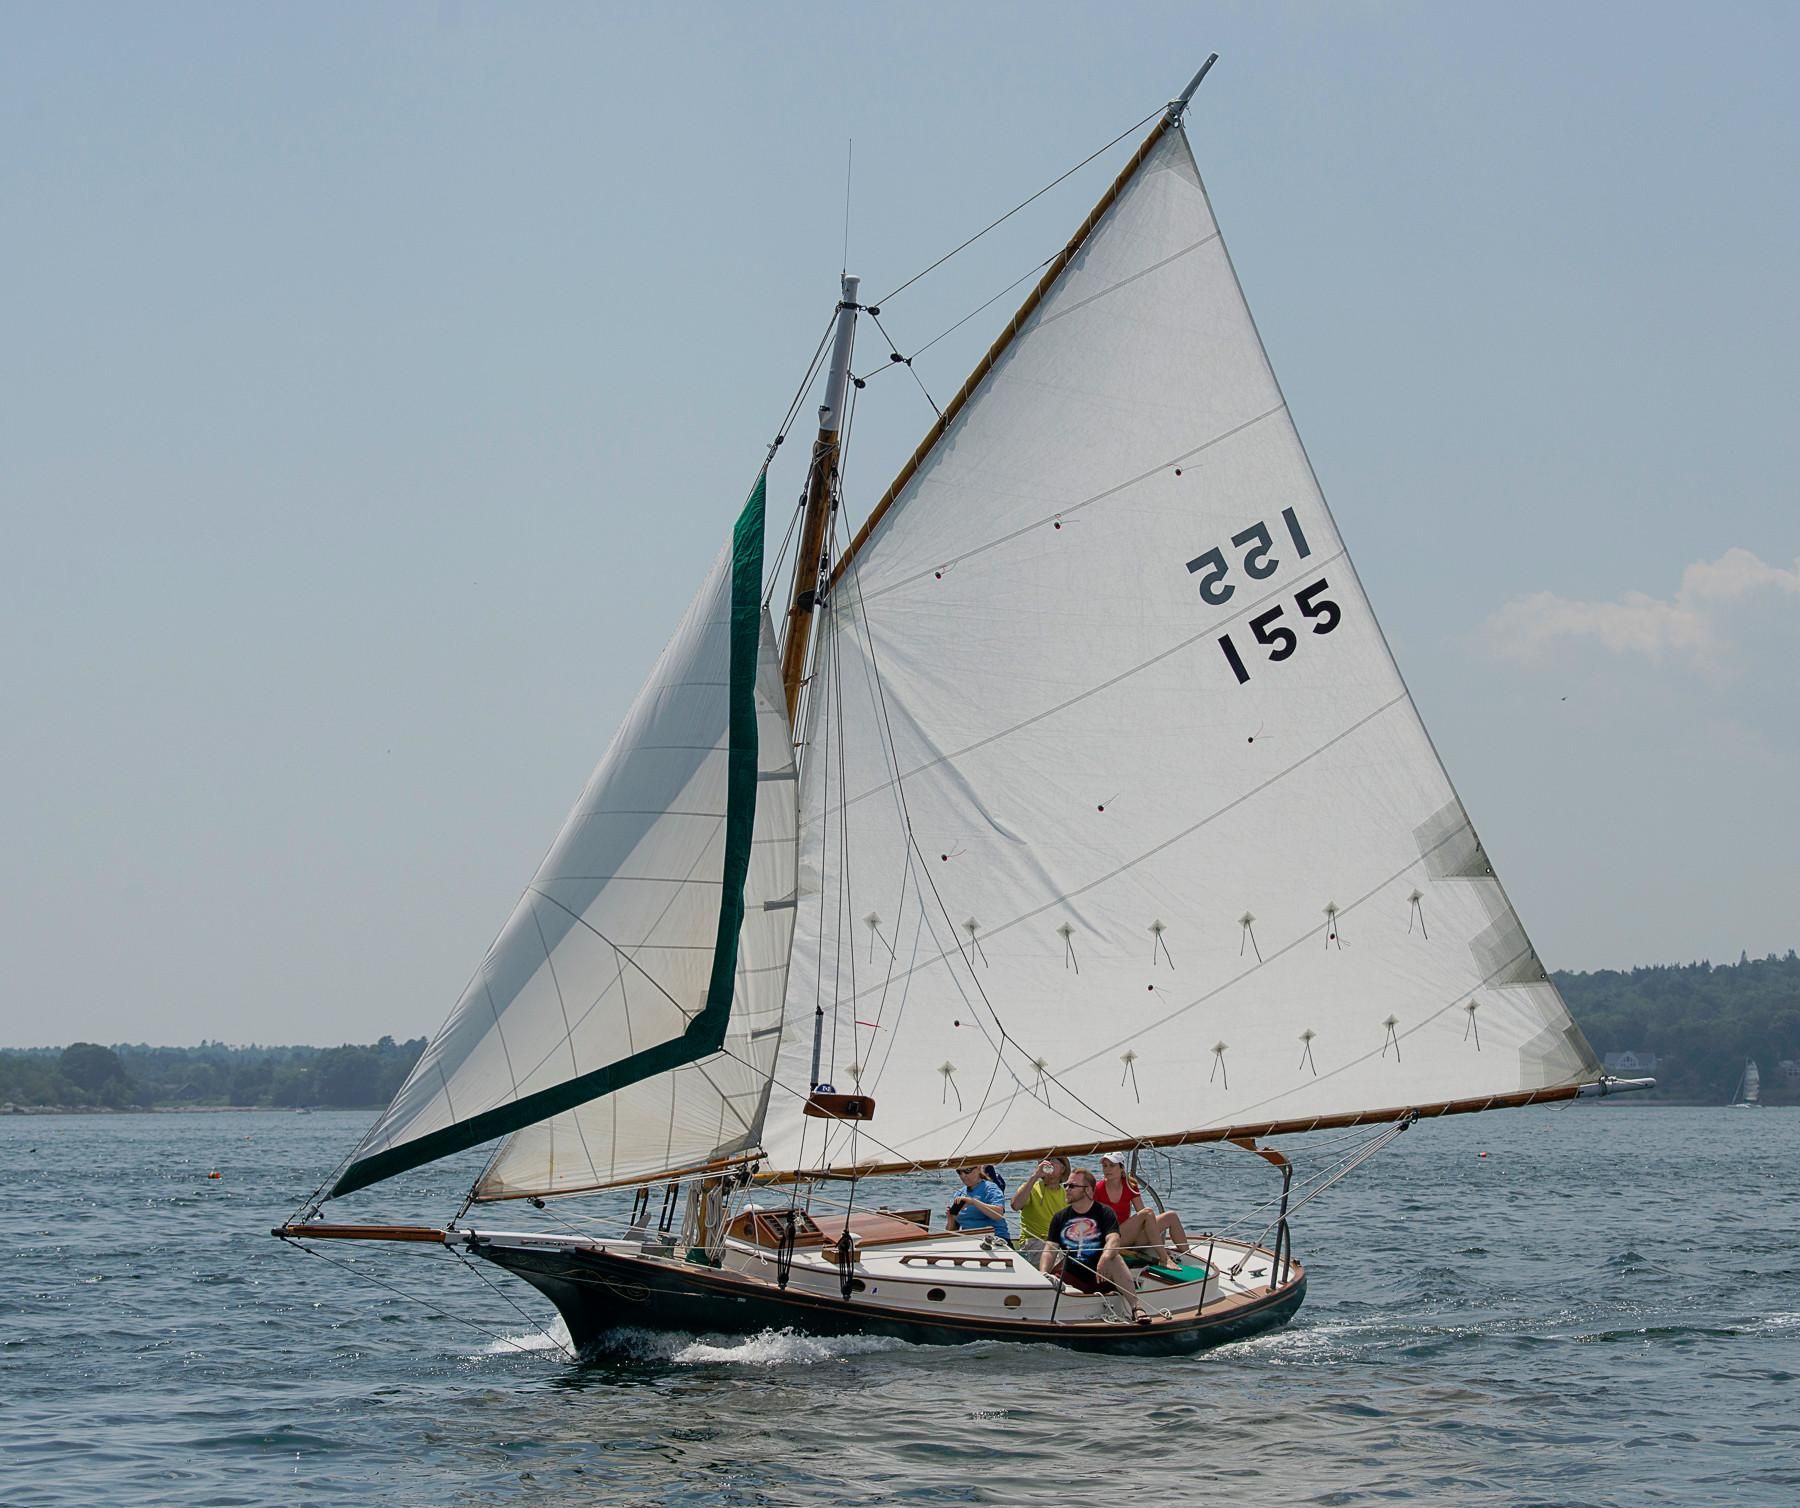 Sloop: it features one mast and two sails, typically a Bermuda rigged main, and a headsail. This simple configuration is very efficient for sailing into the wind.